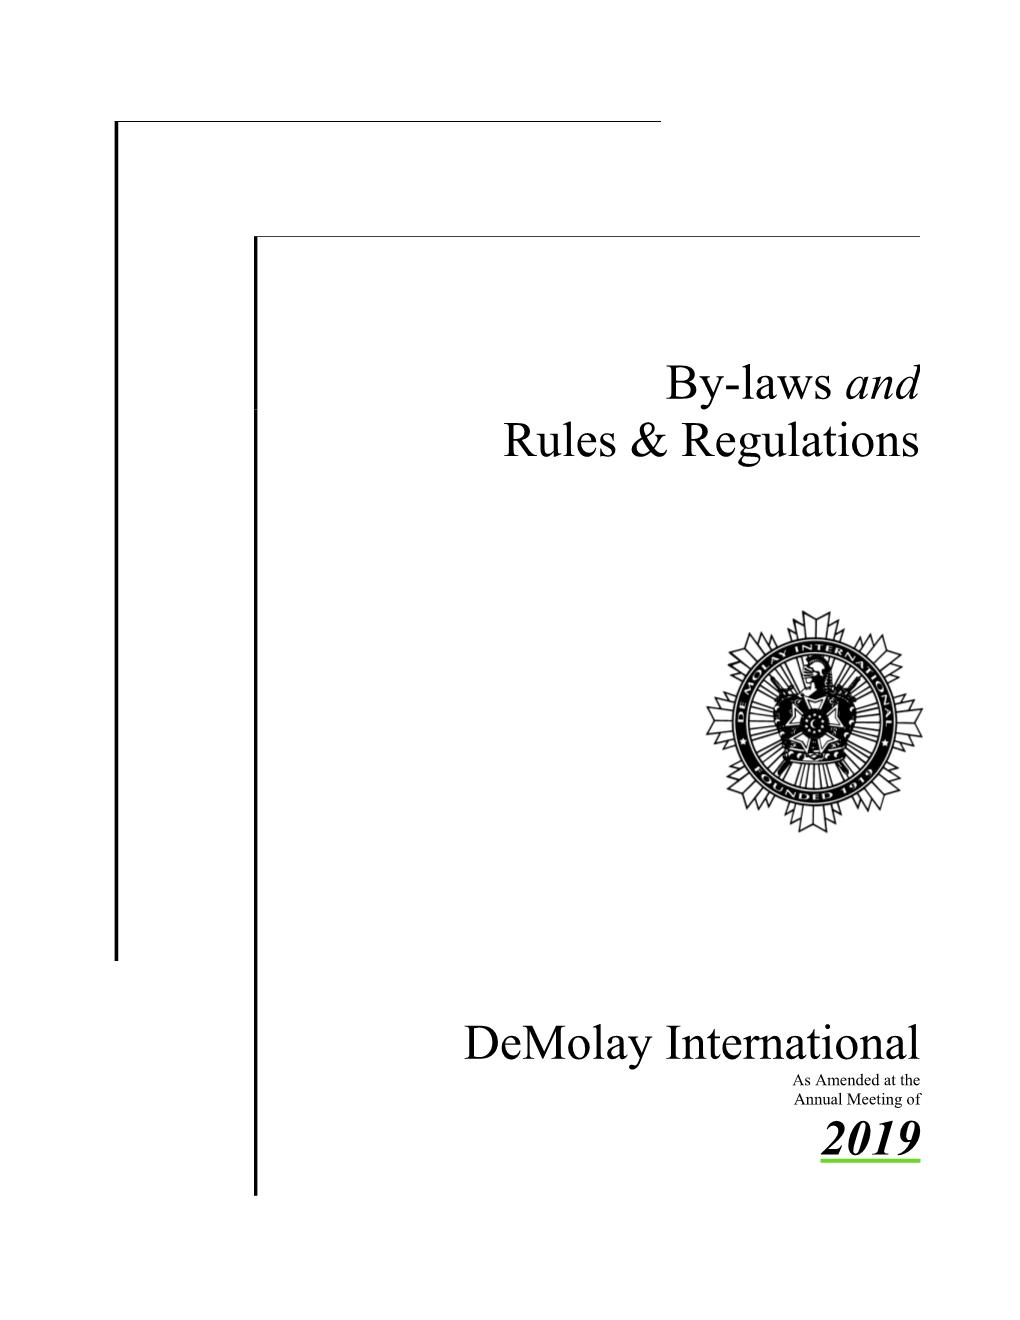 By-Laws and Rules & Regulations Demolay International 2019